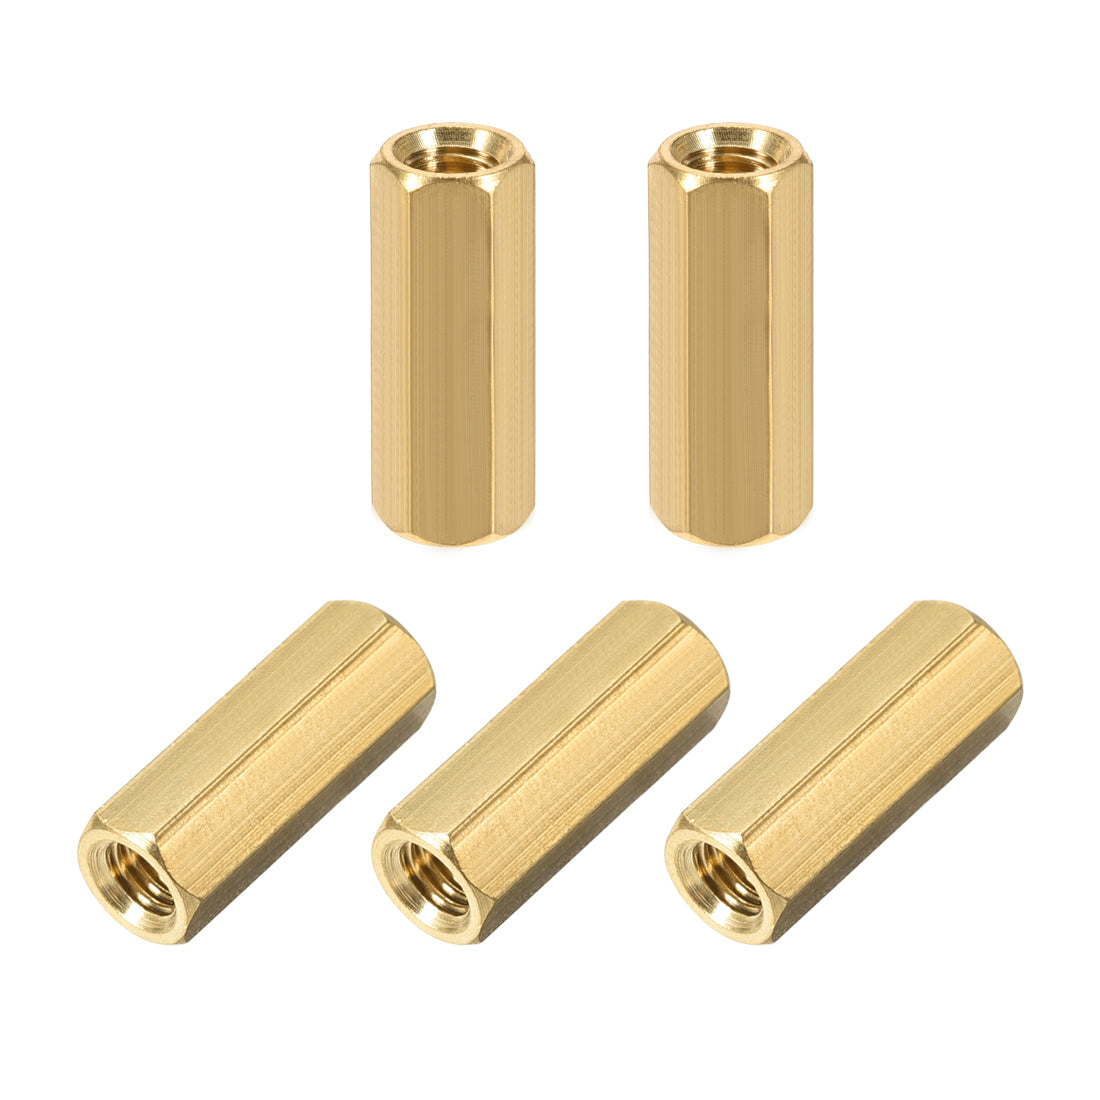 Uxcell Uxcell M5 x 20 mm Female to Female Hex Brass Spacer Standoff 5pcs